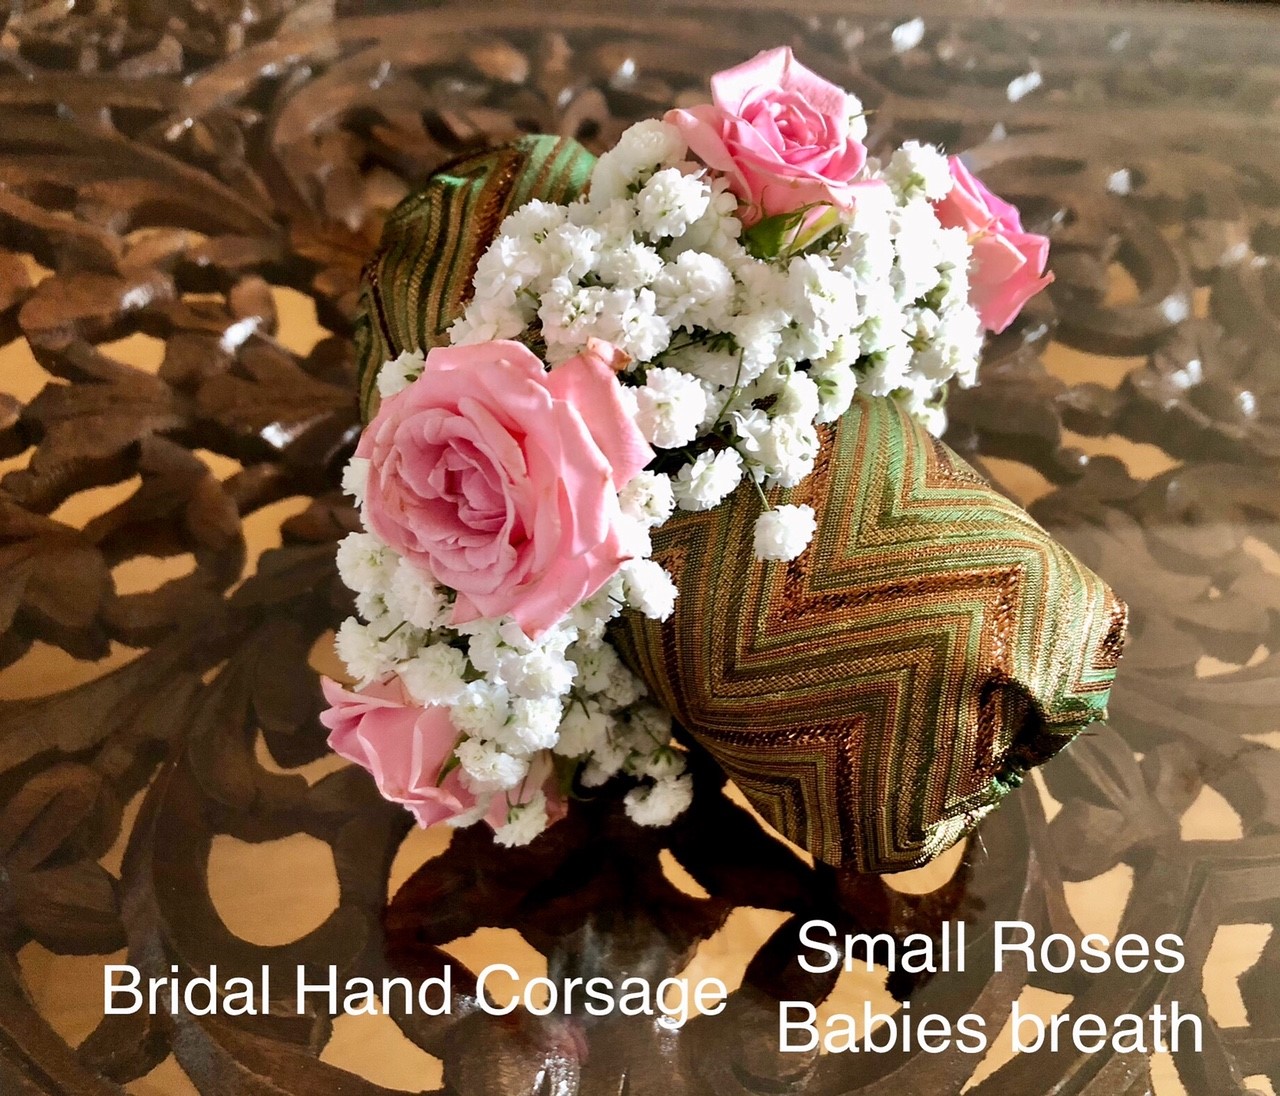 $27.50 each Bridal hand corsage small roses 